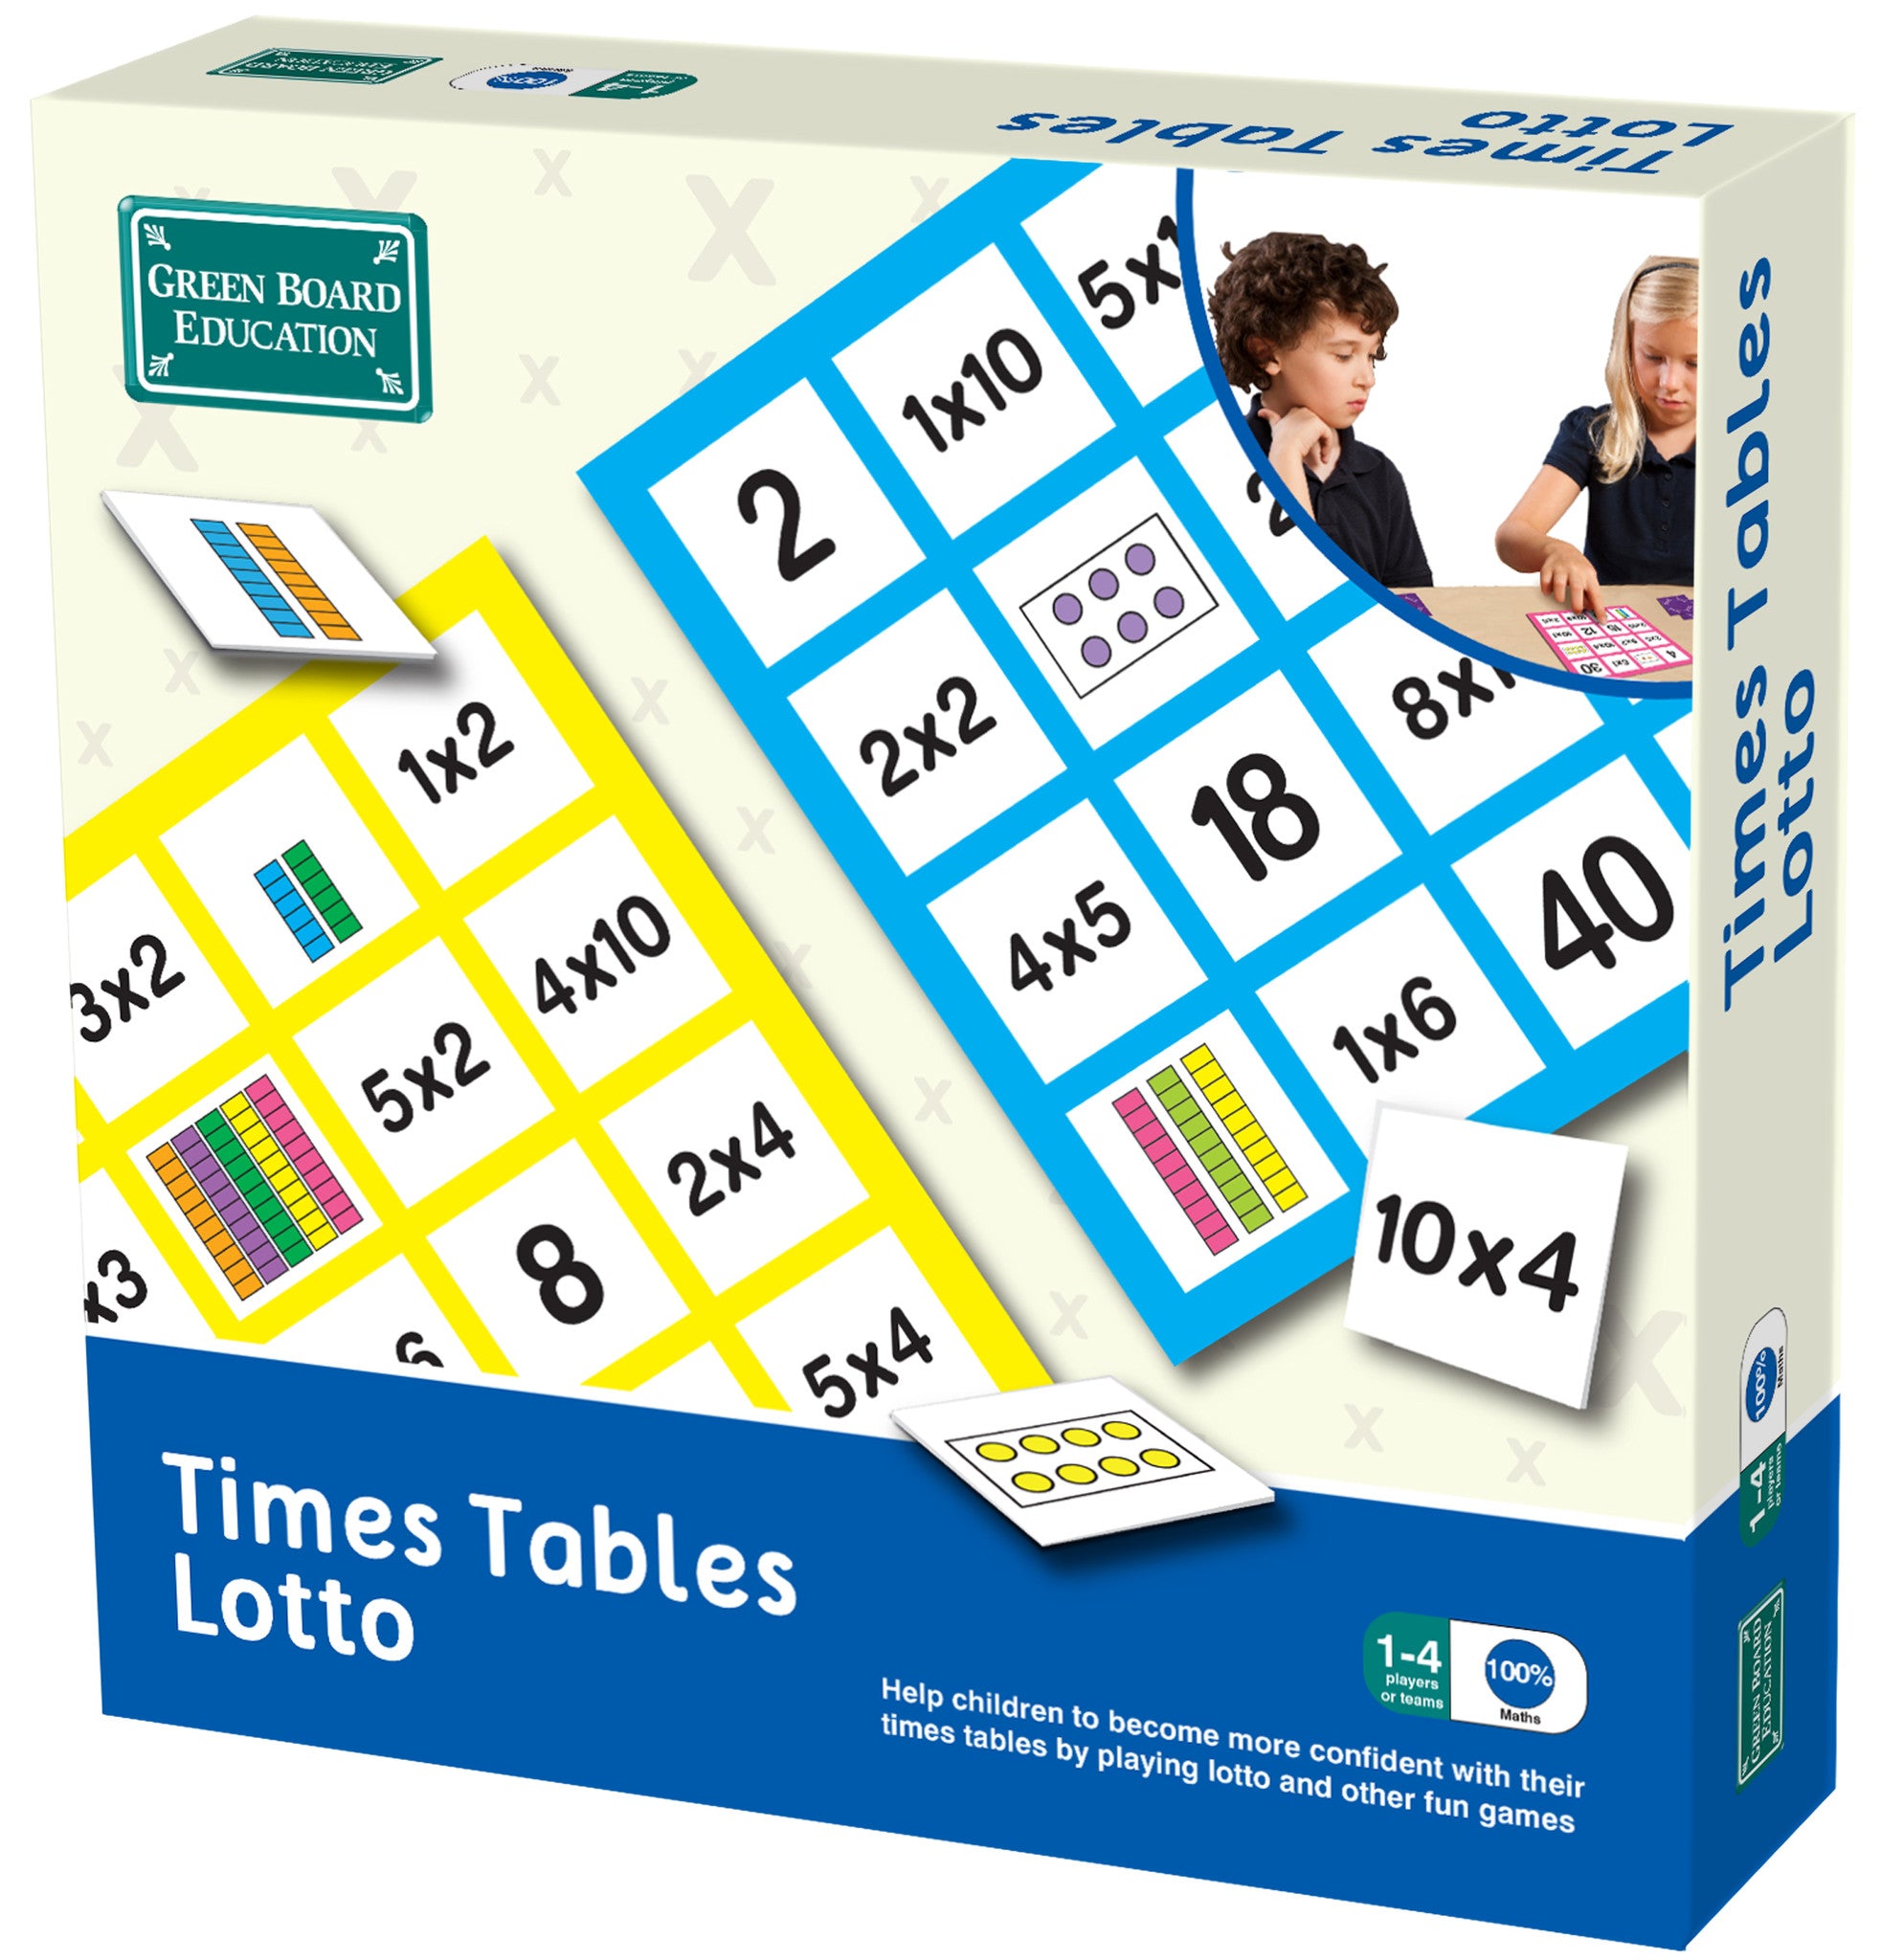 GREEN BOARD EDUCATION Time Table Lotto